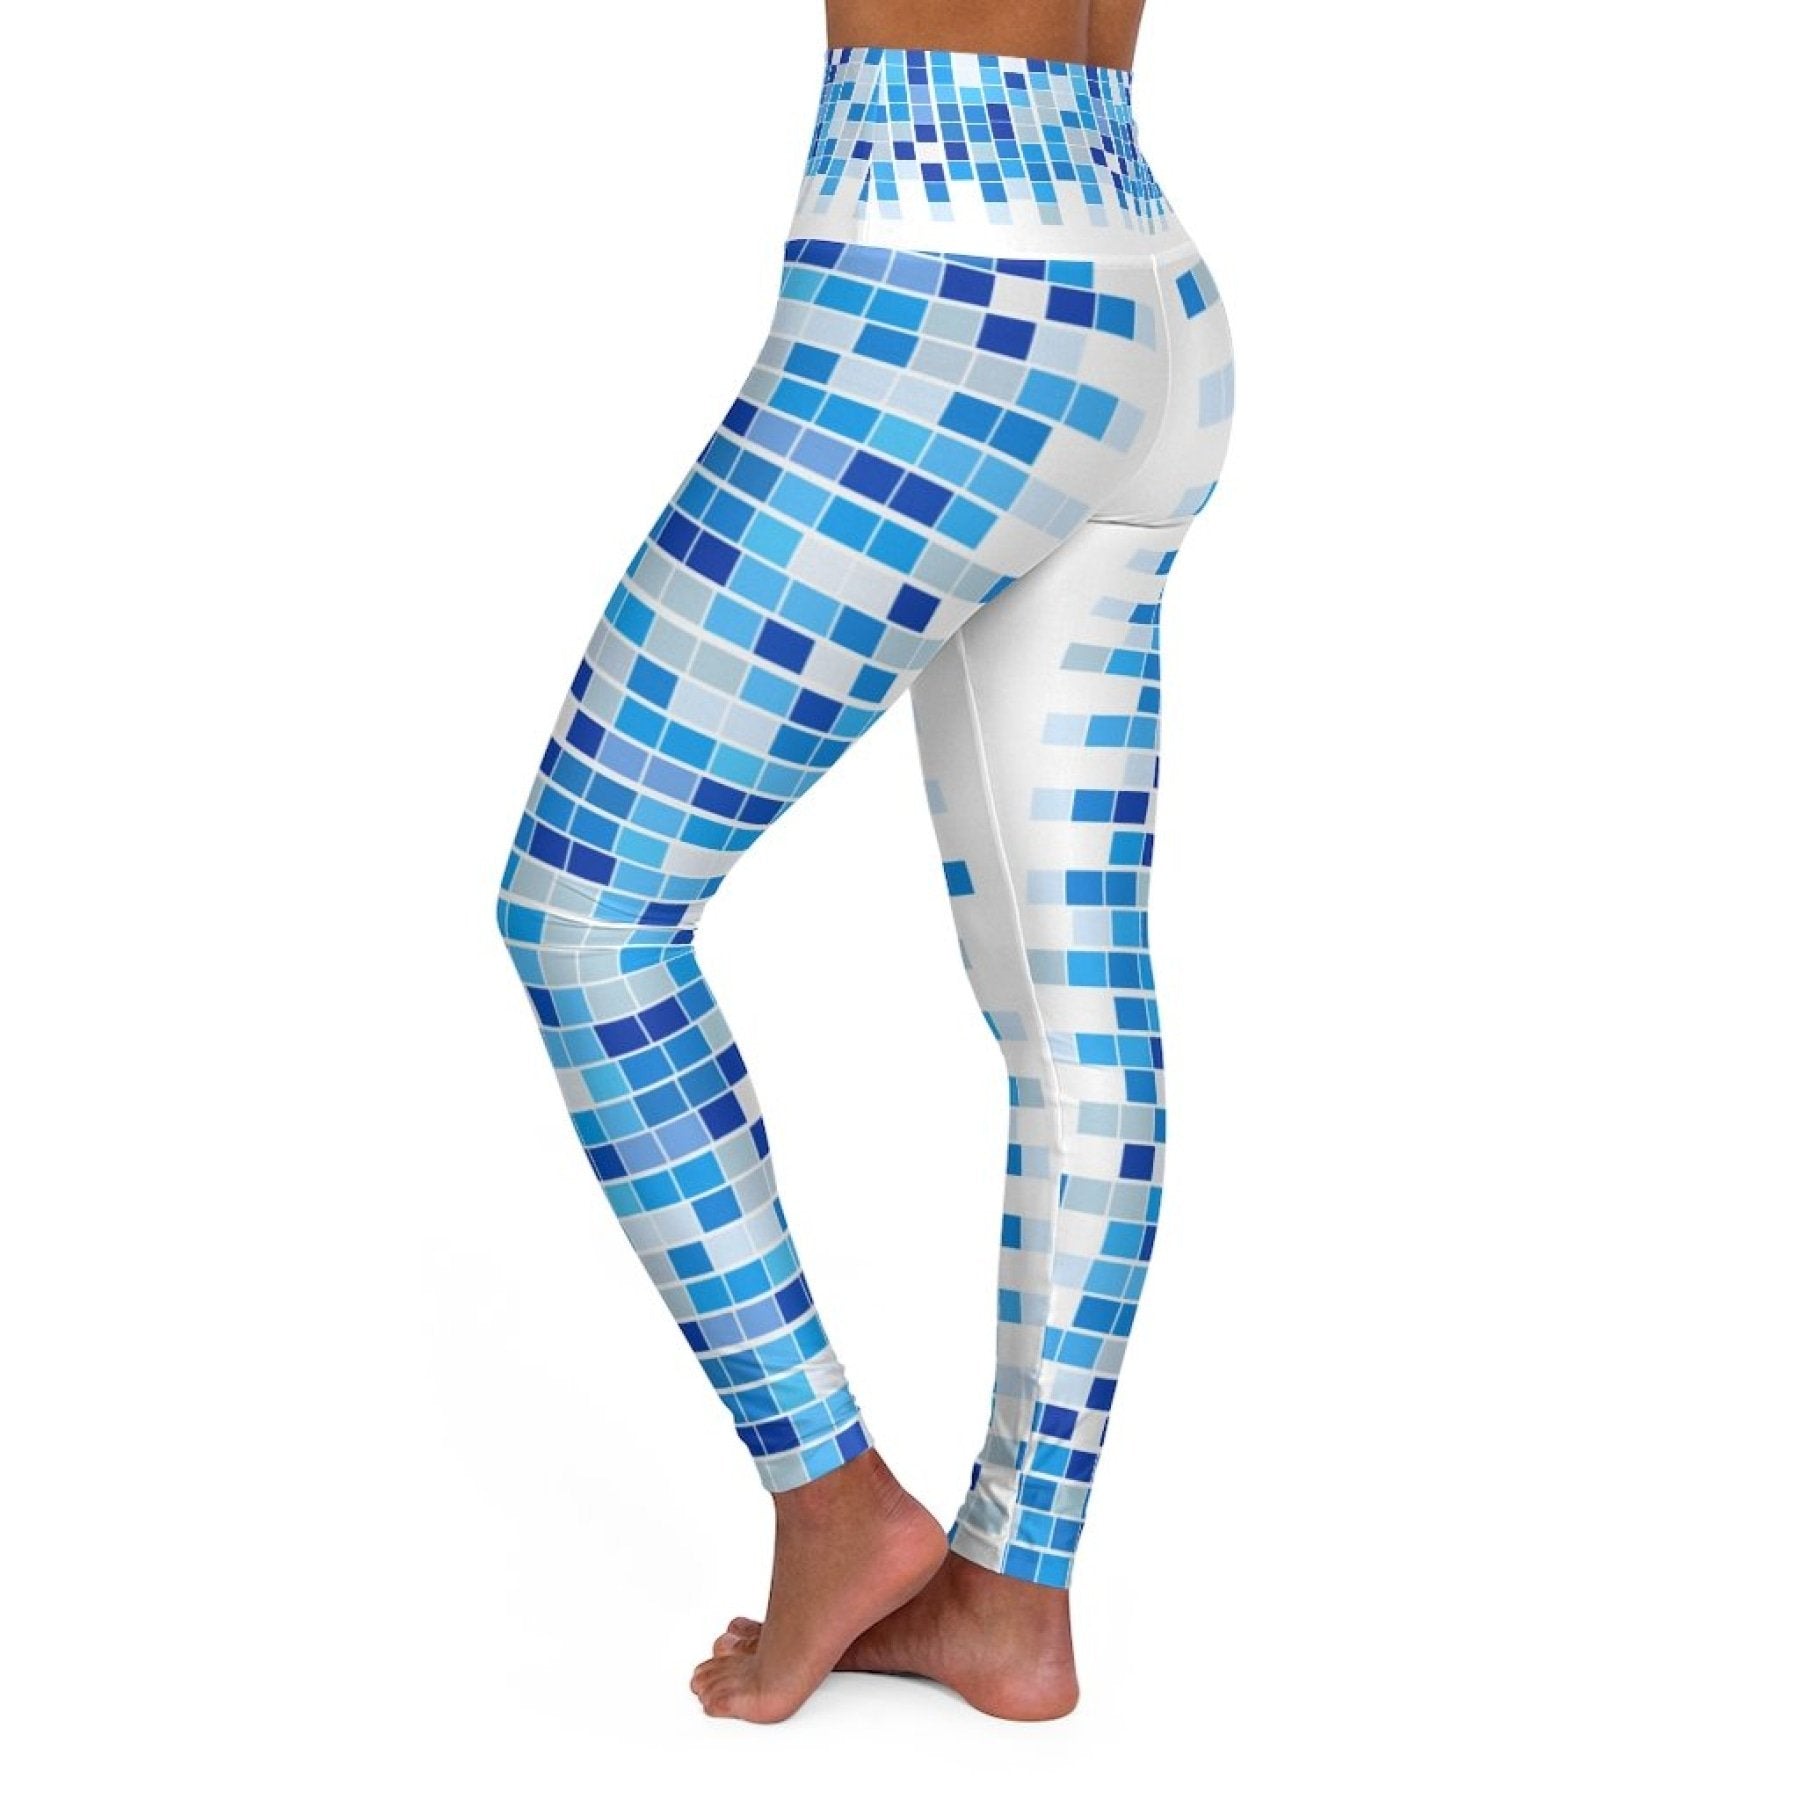 High Waisted Yoga Leggings, Blue And White Mosaic Square Style Pants